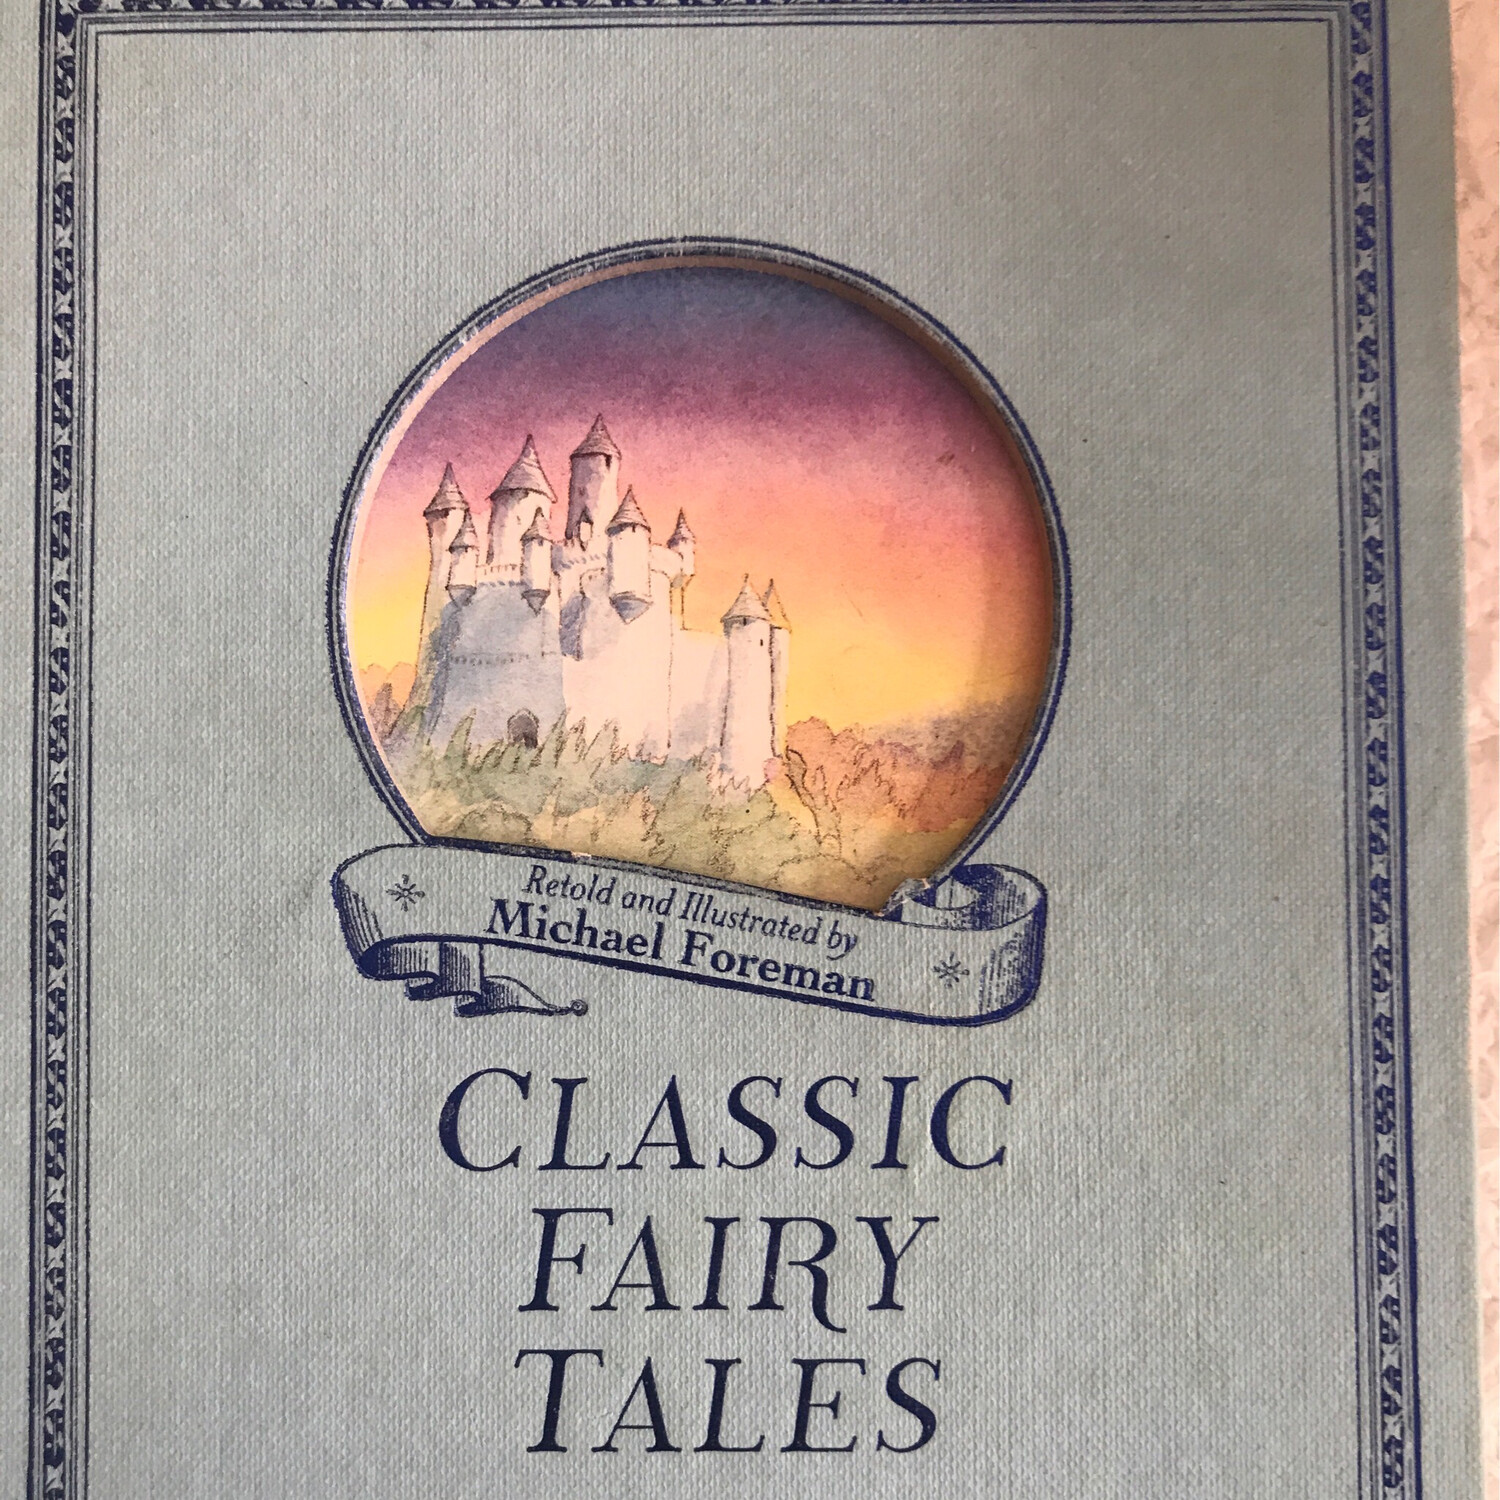 Classic Fairy Tales, Retold And Illustrated By Michael Foreman